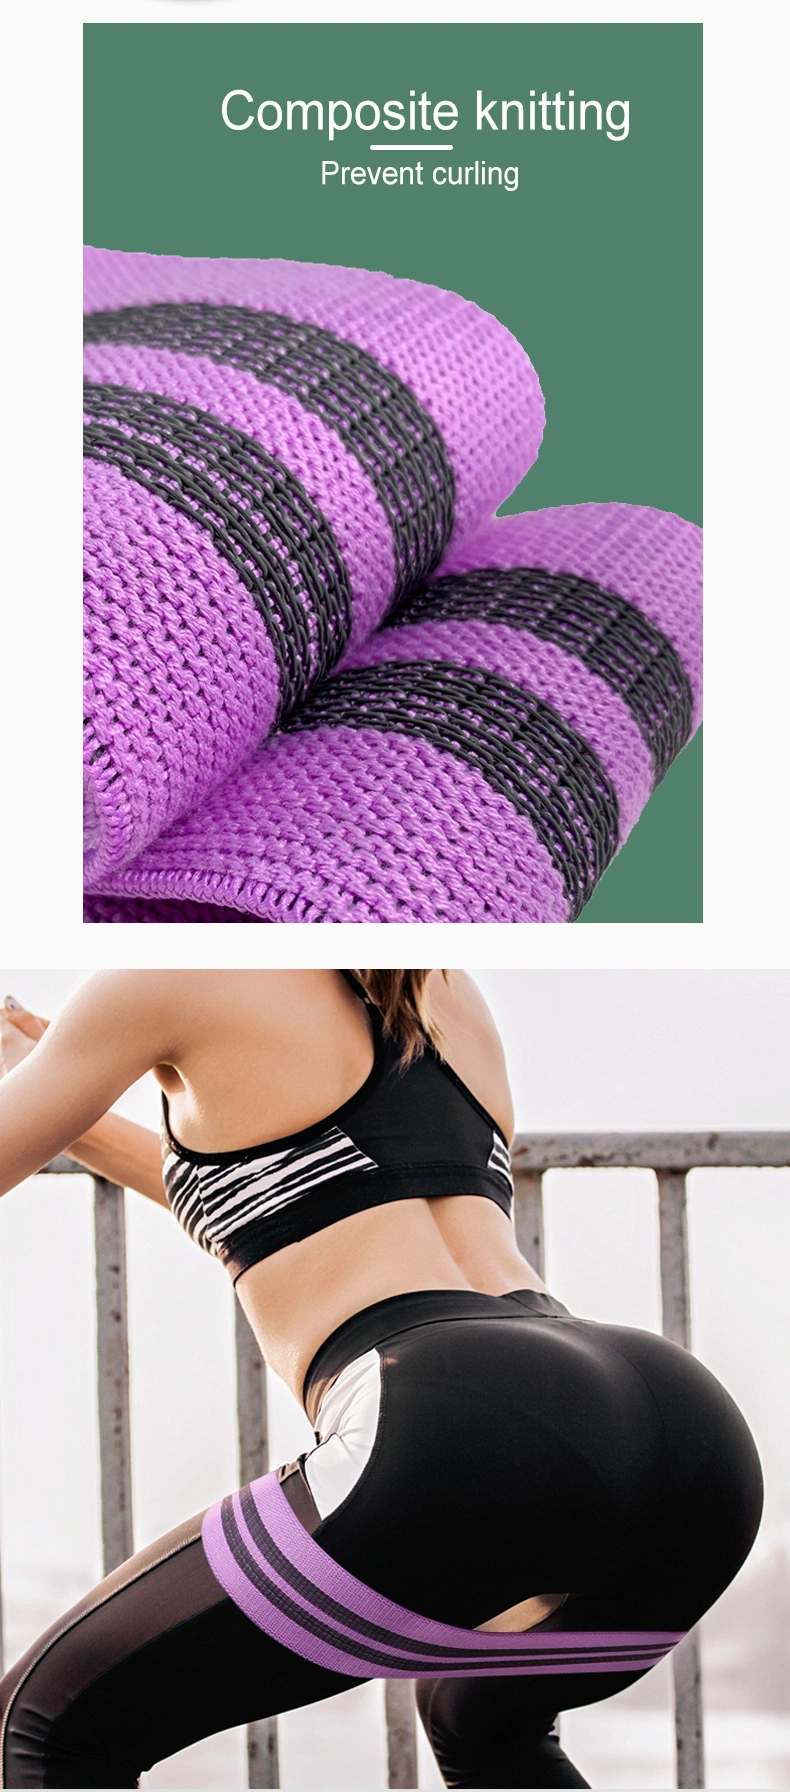 Custom Logo Fitness Strength Training Bottom Elastic Fabric Resistance Bands for Legs and Butt in Gym